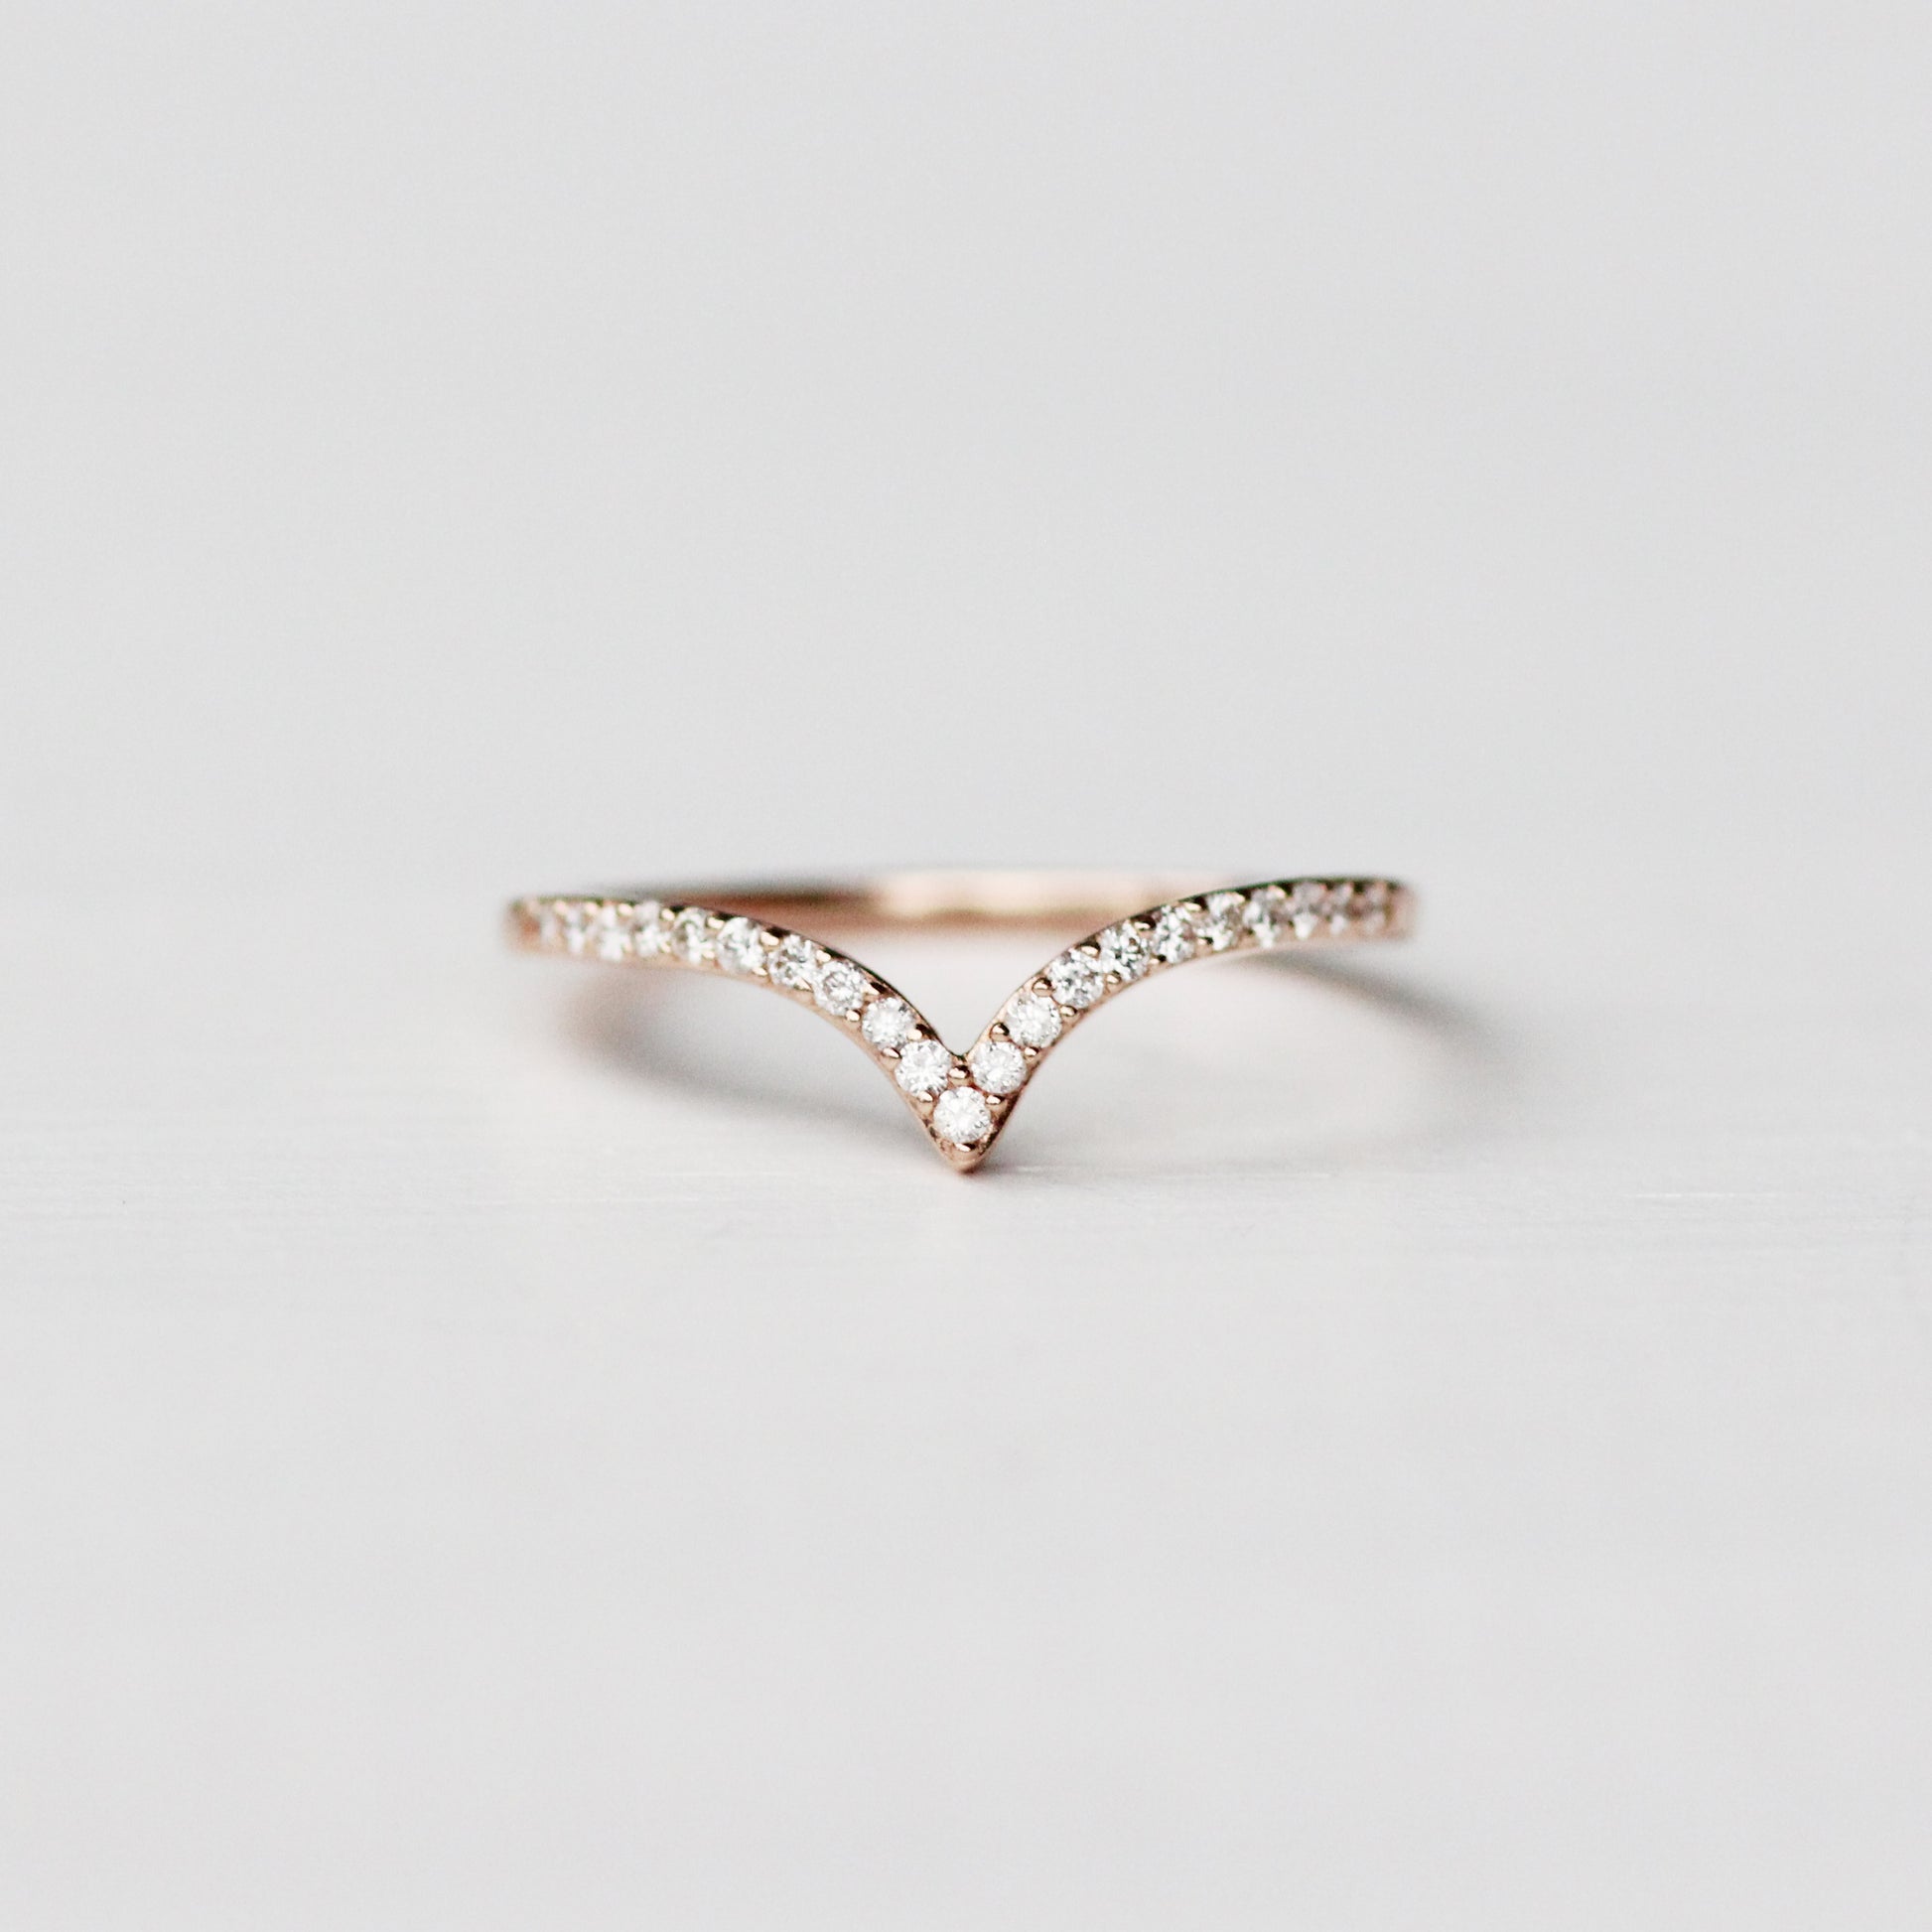 Vern wedding band - Contour Point V shape Diamond Band - Gold of choice - Midwinter Co. Alternative Bridal Rings and Modern Fine Jewelry